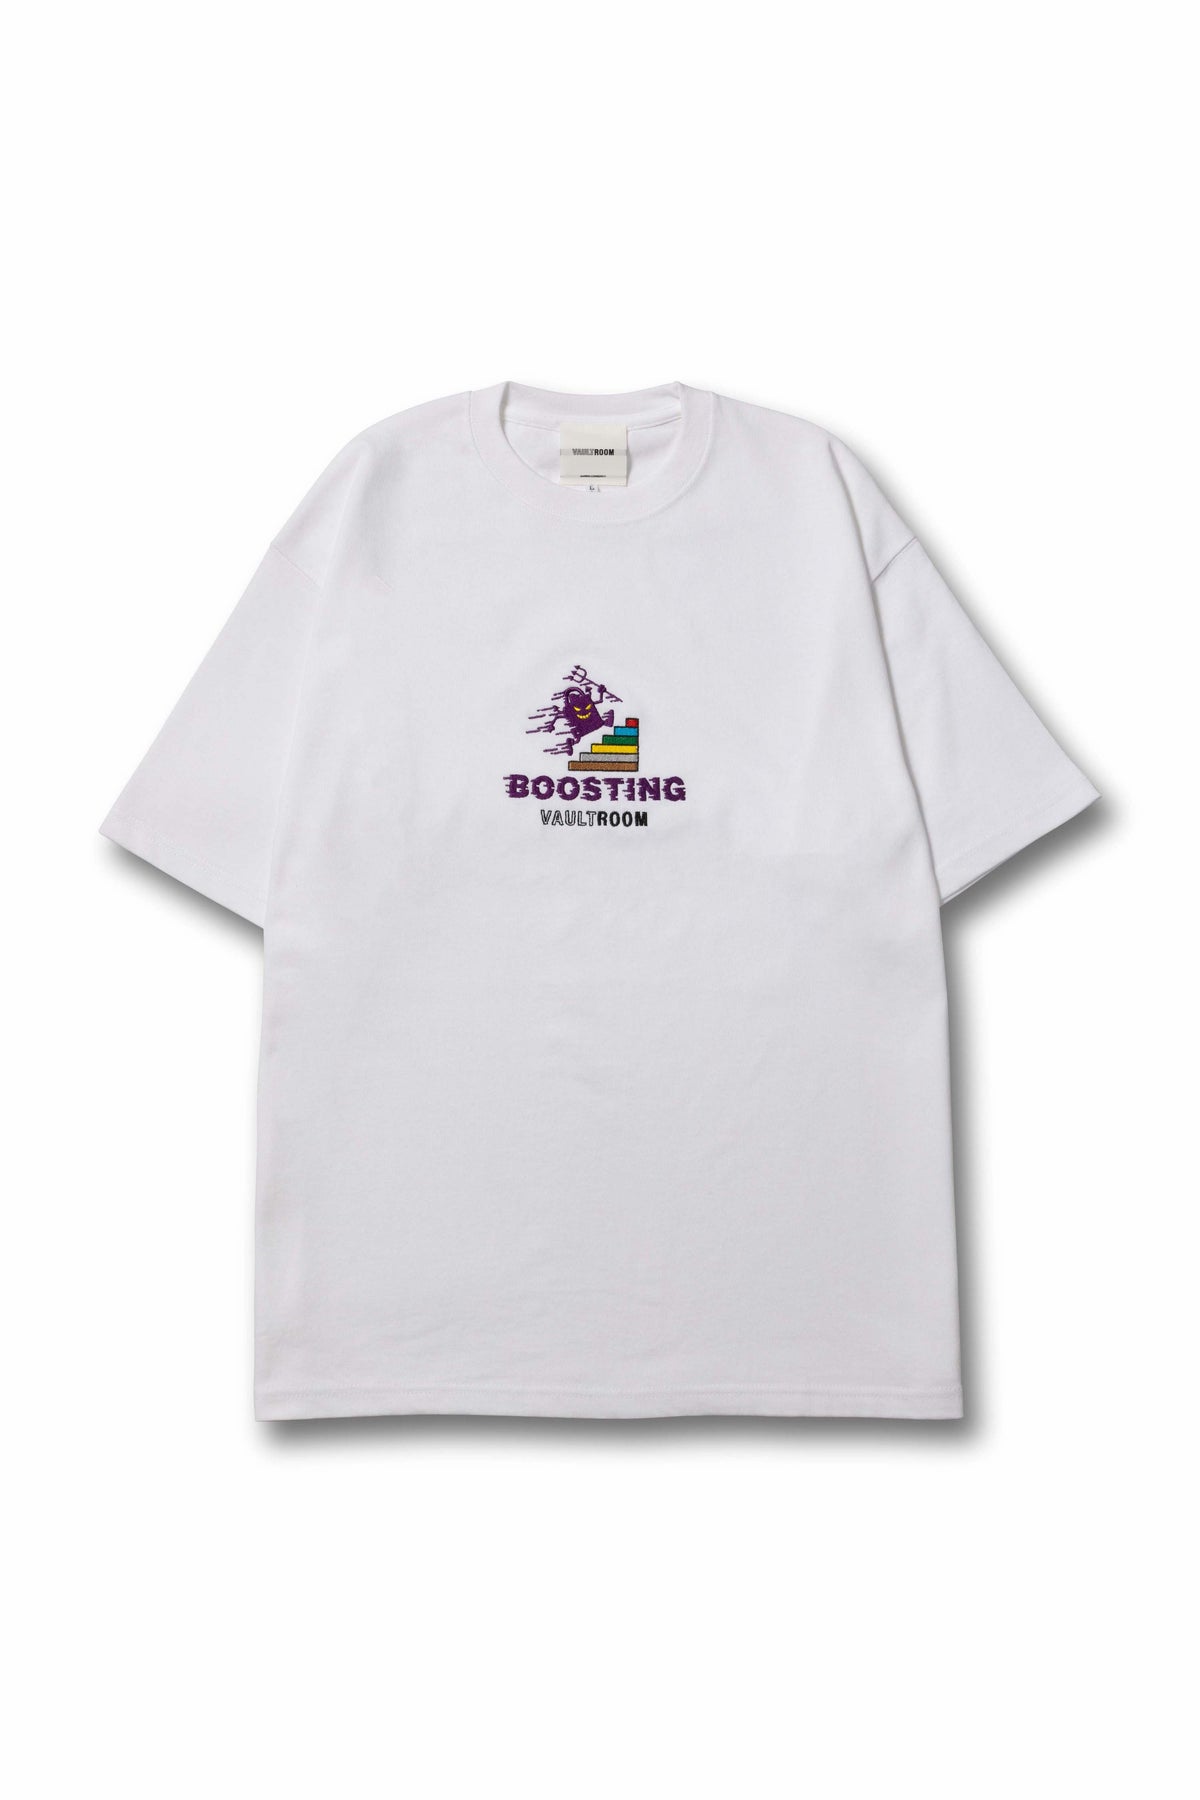 vaultroom BOOSTING TEE / BLK ステッカー付 - Tシャツ/カットソー 